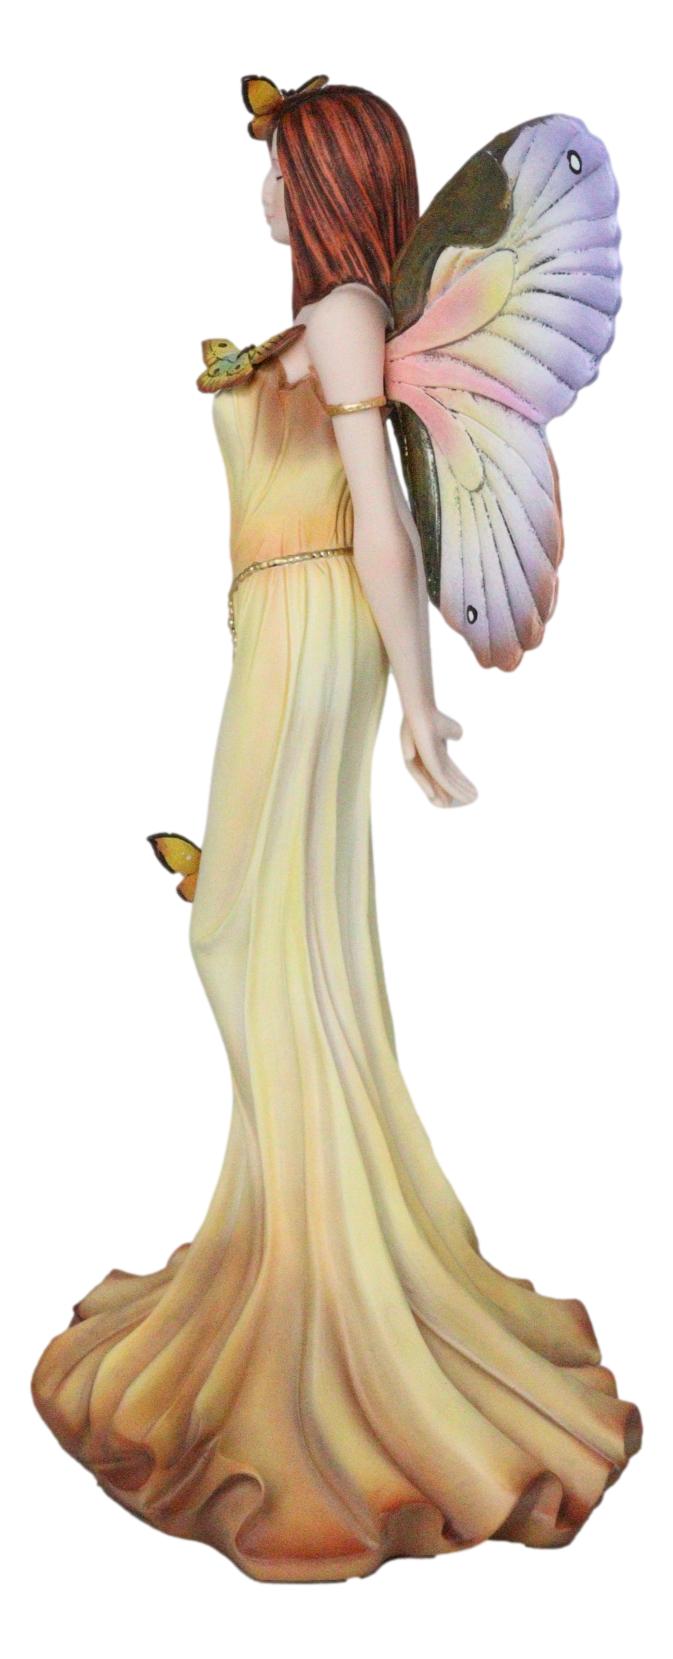 Whimsical Garden Spring Monarch Butterfly Fairy Standing Eyes Closed Figurine